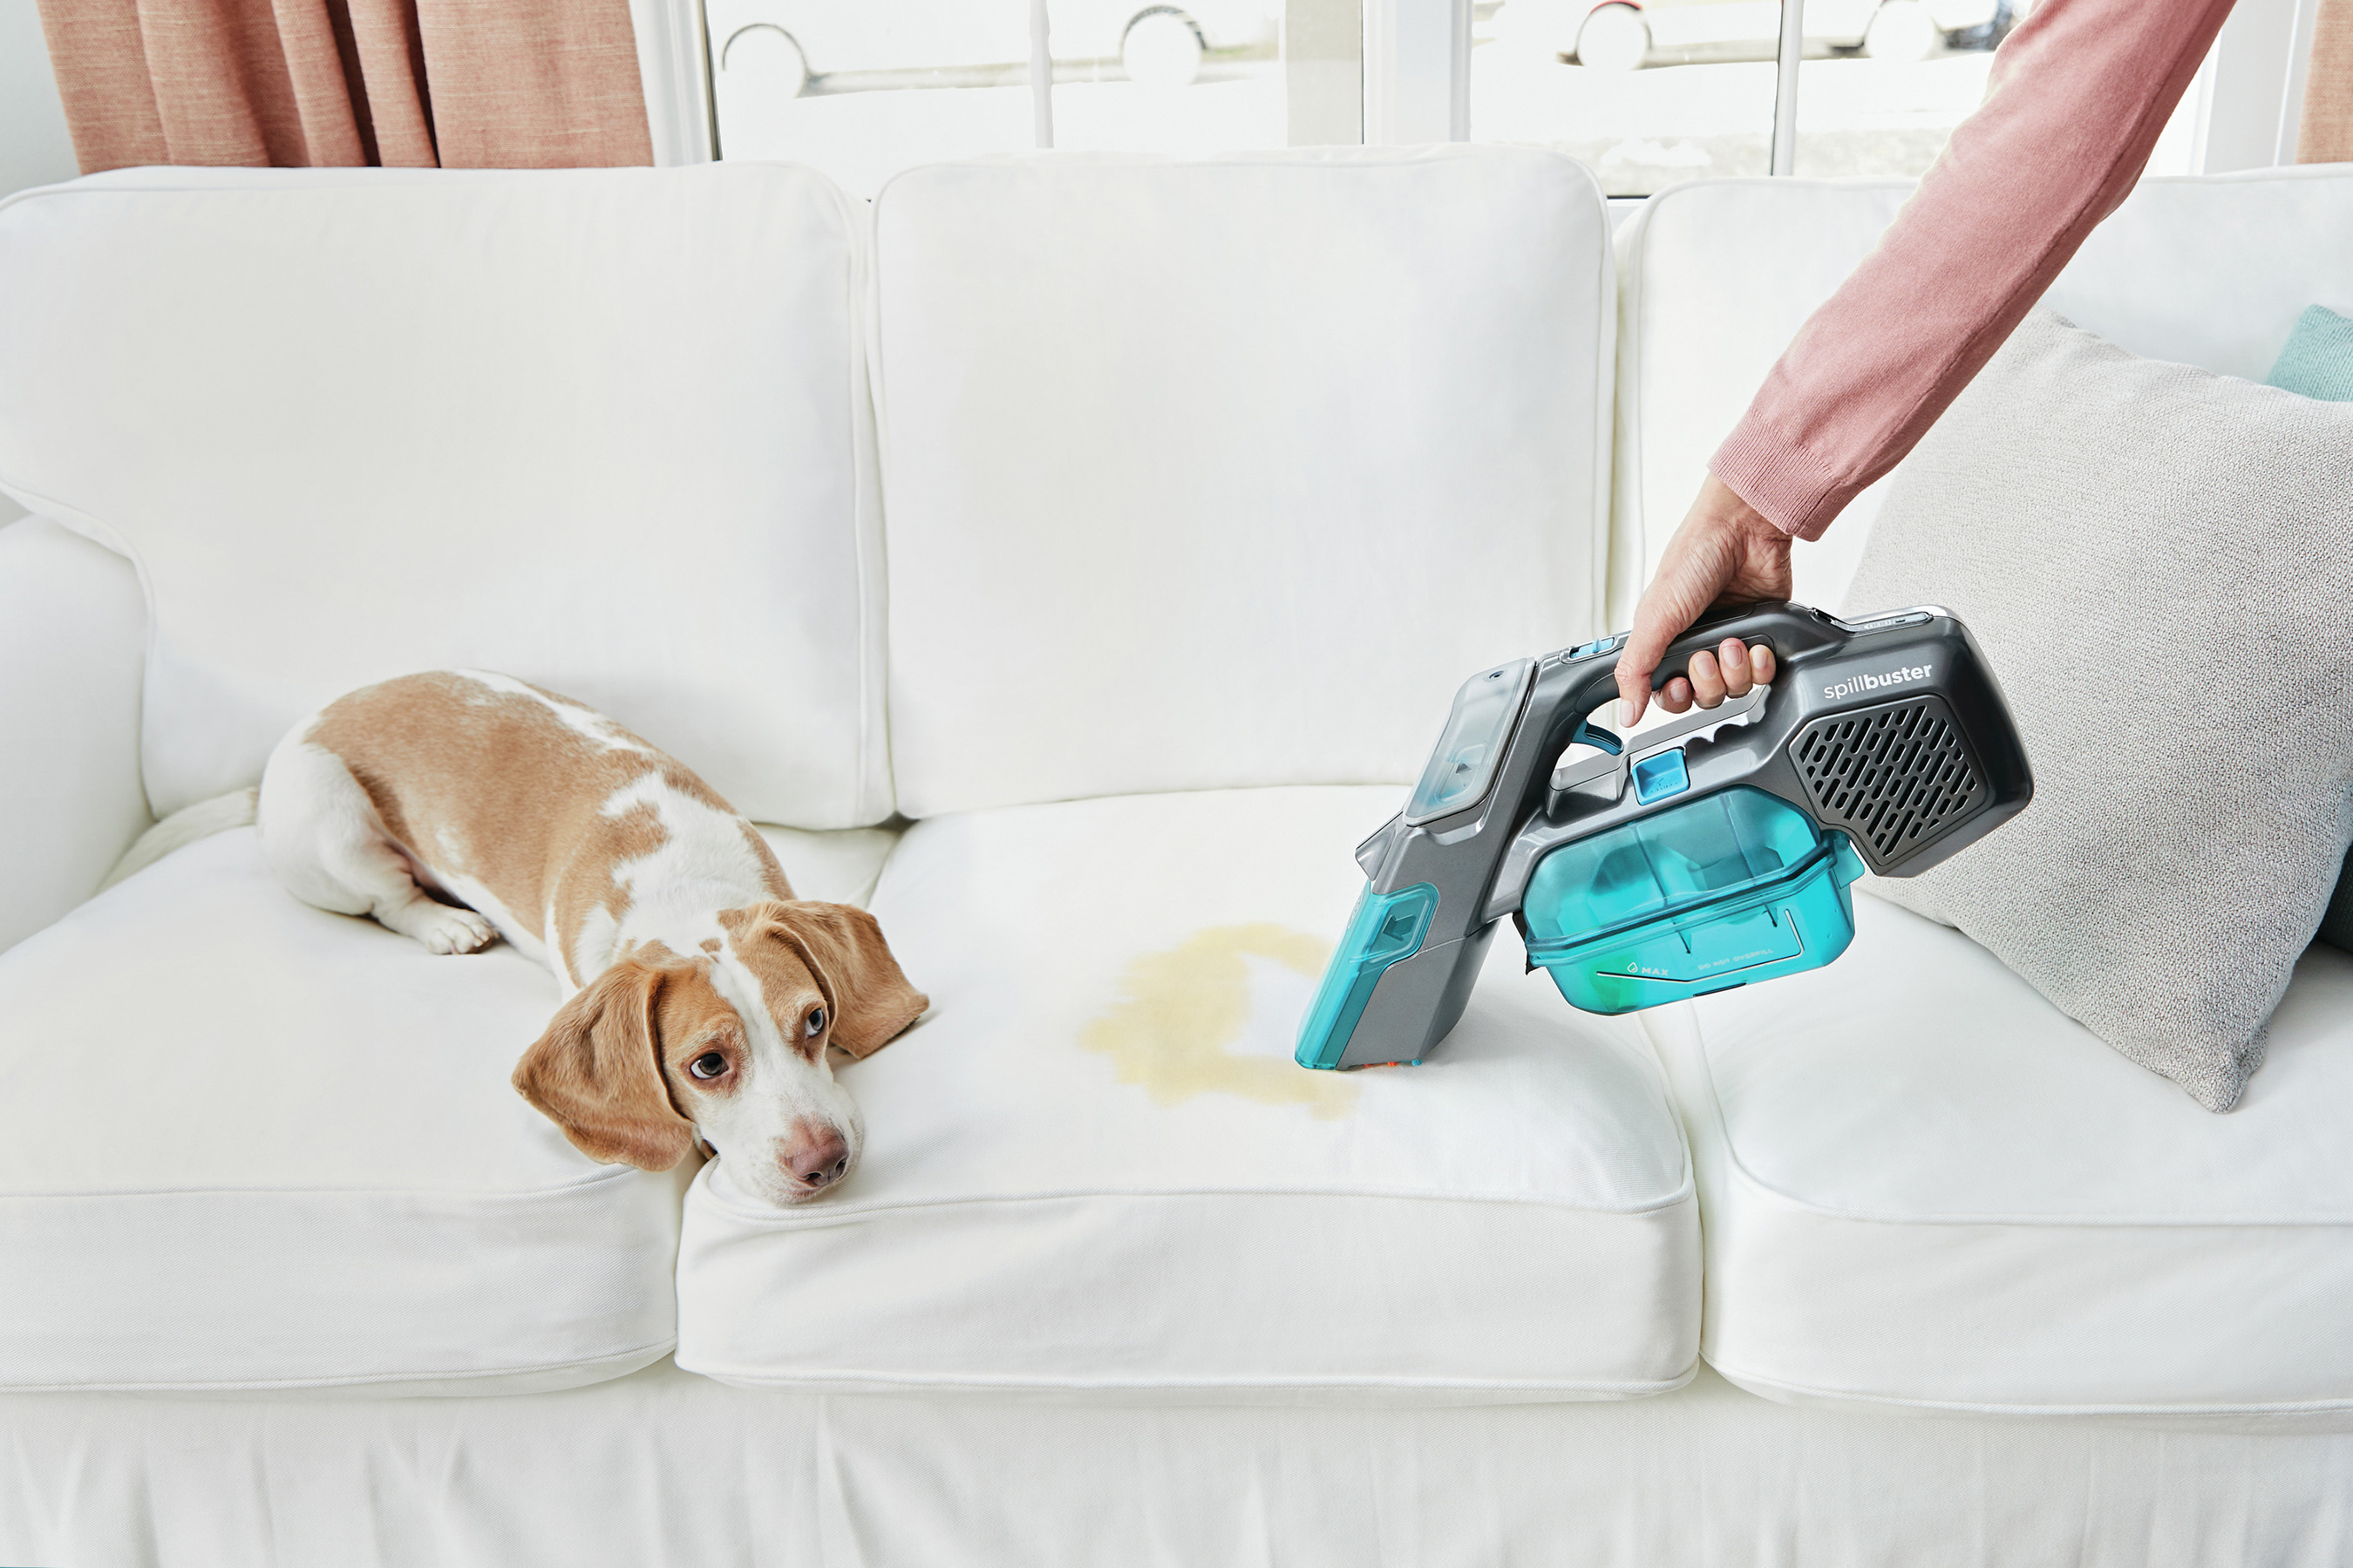 BLACK+DECKER™ Introduces the spillbuster™ Cordless Spill + Spot Cleaner To  Tackle Wet And Chunky Messes